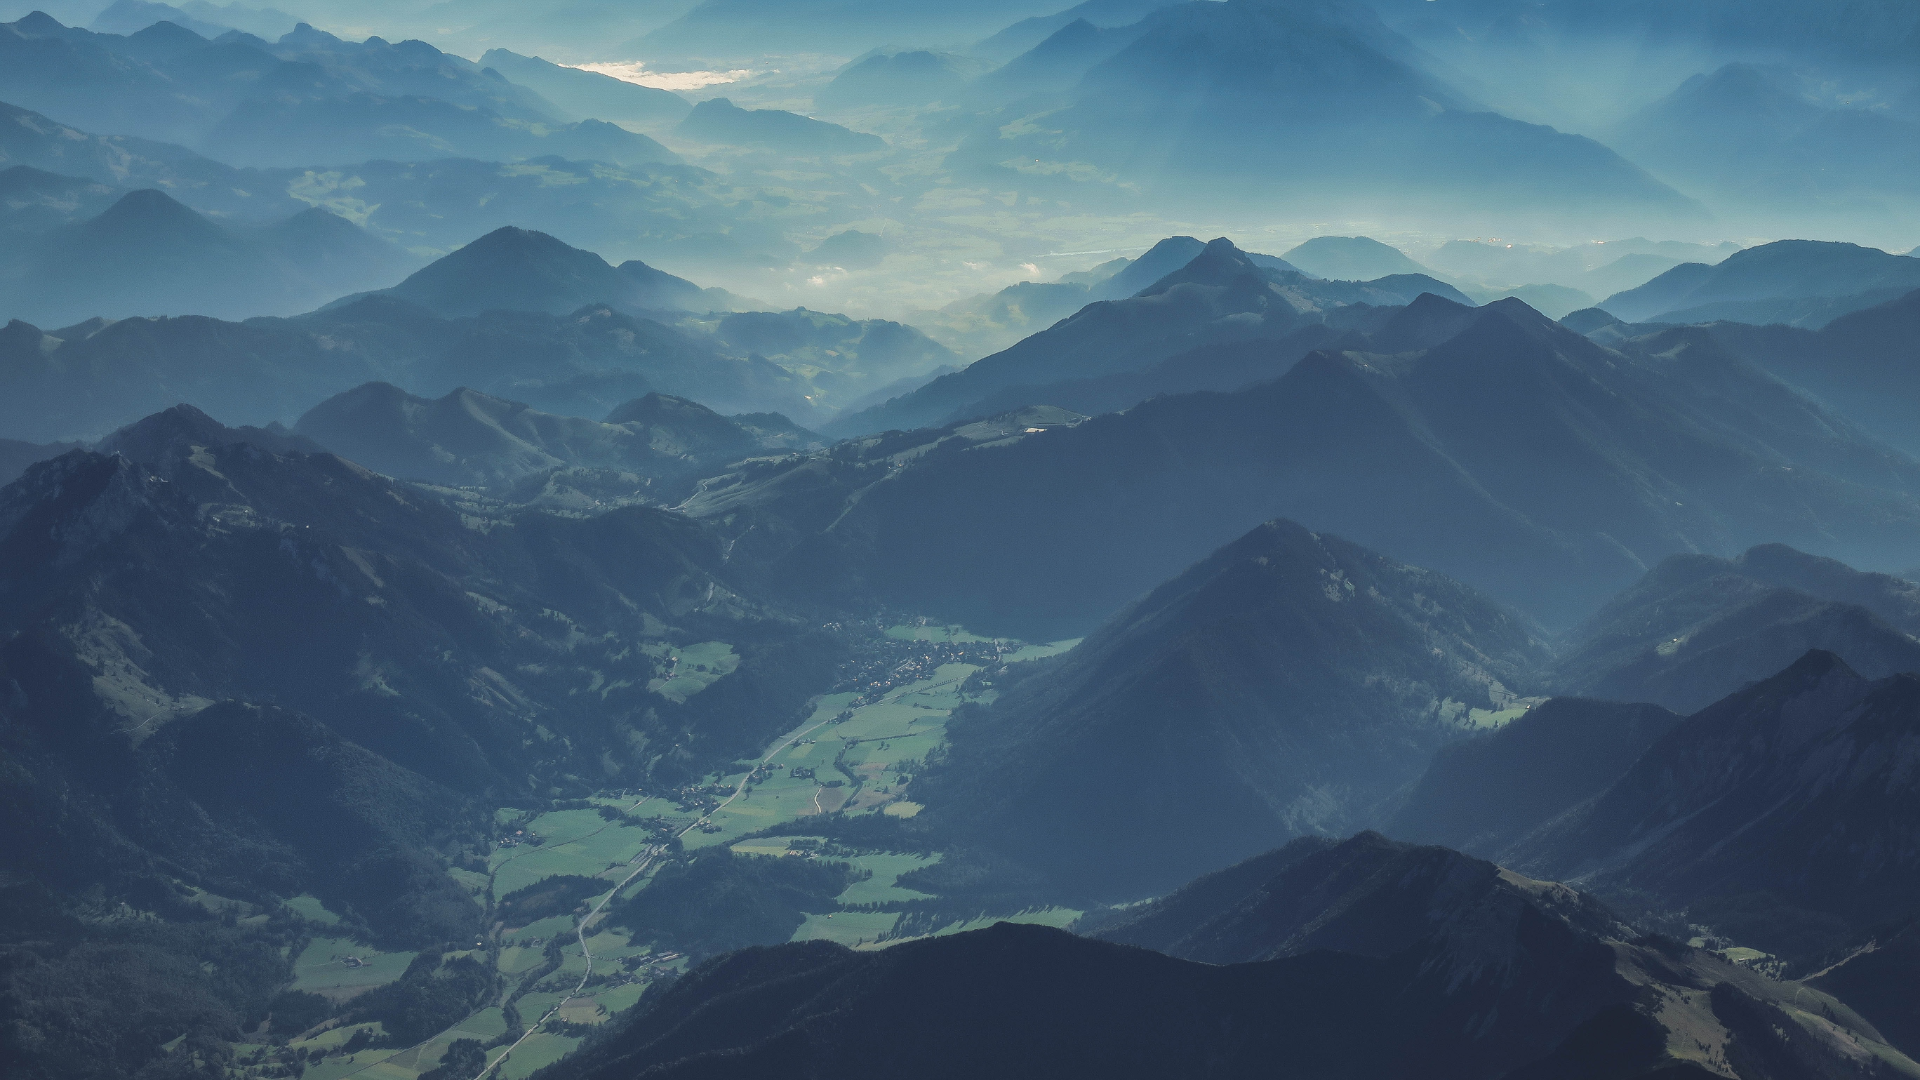 General 1920x1080 nature landscape mountains mist valley trees aerial view Austria